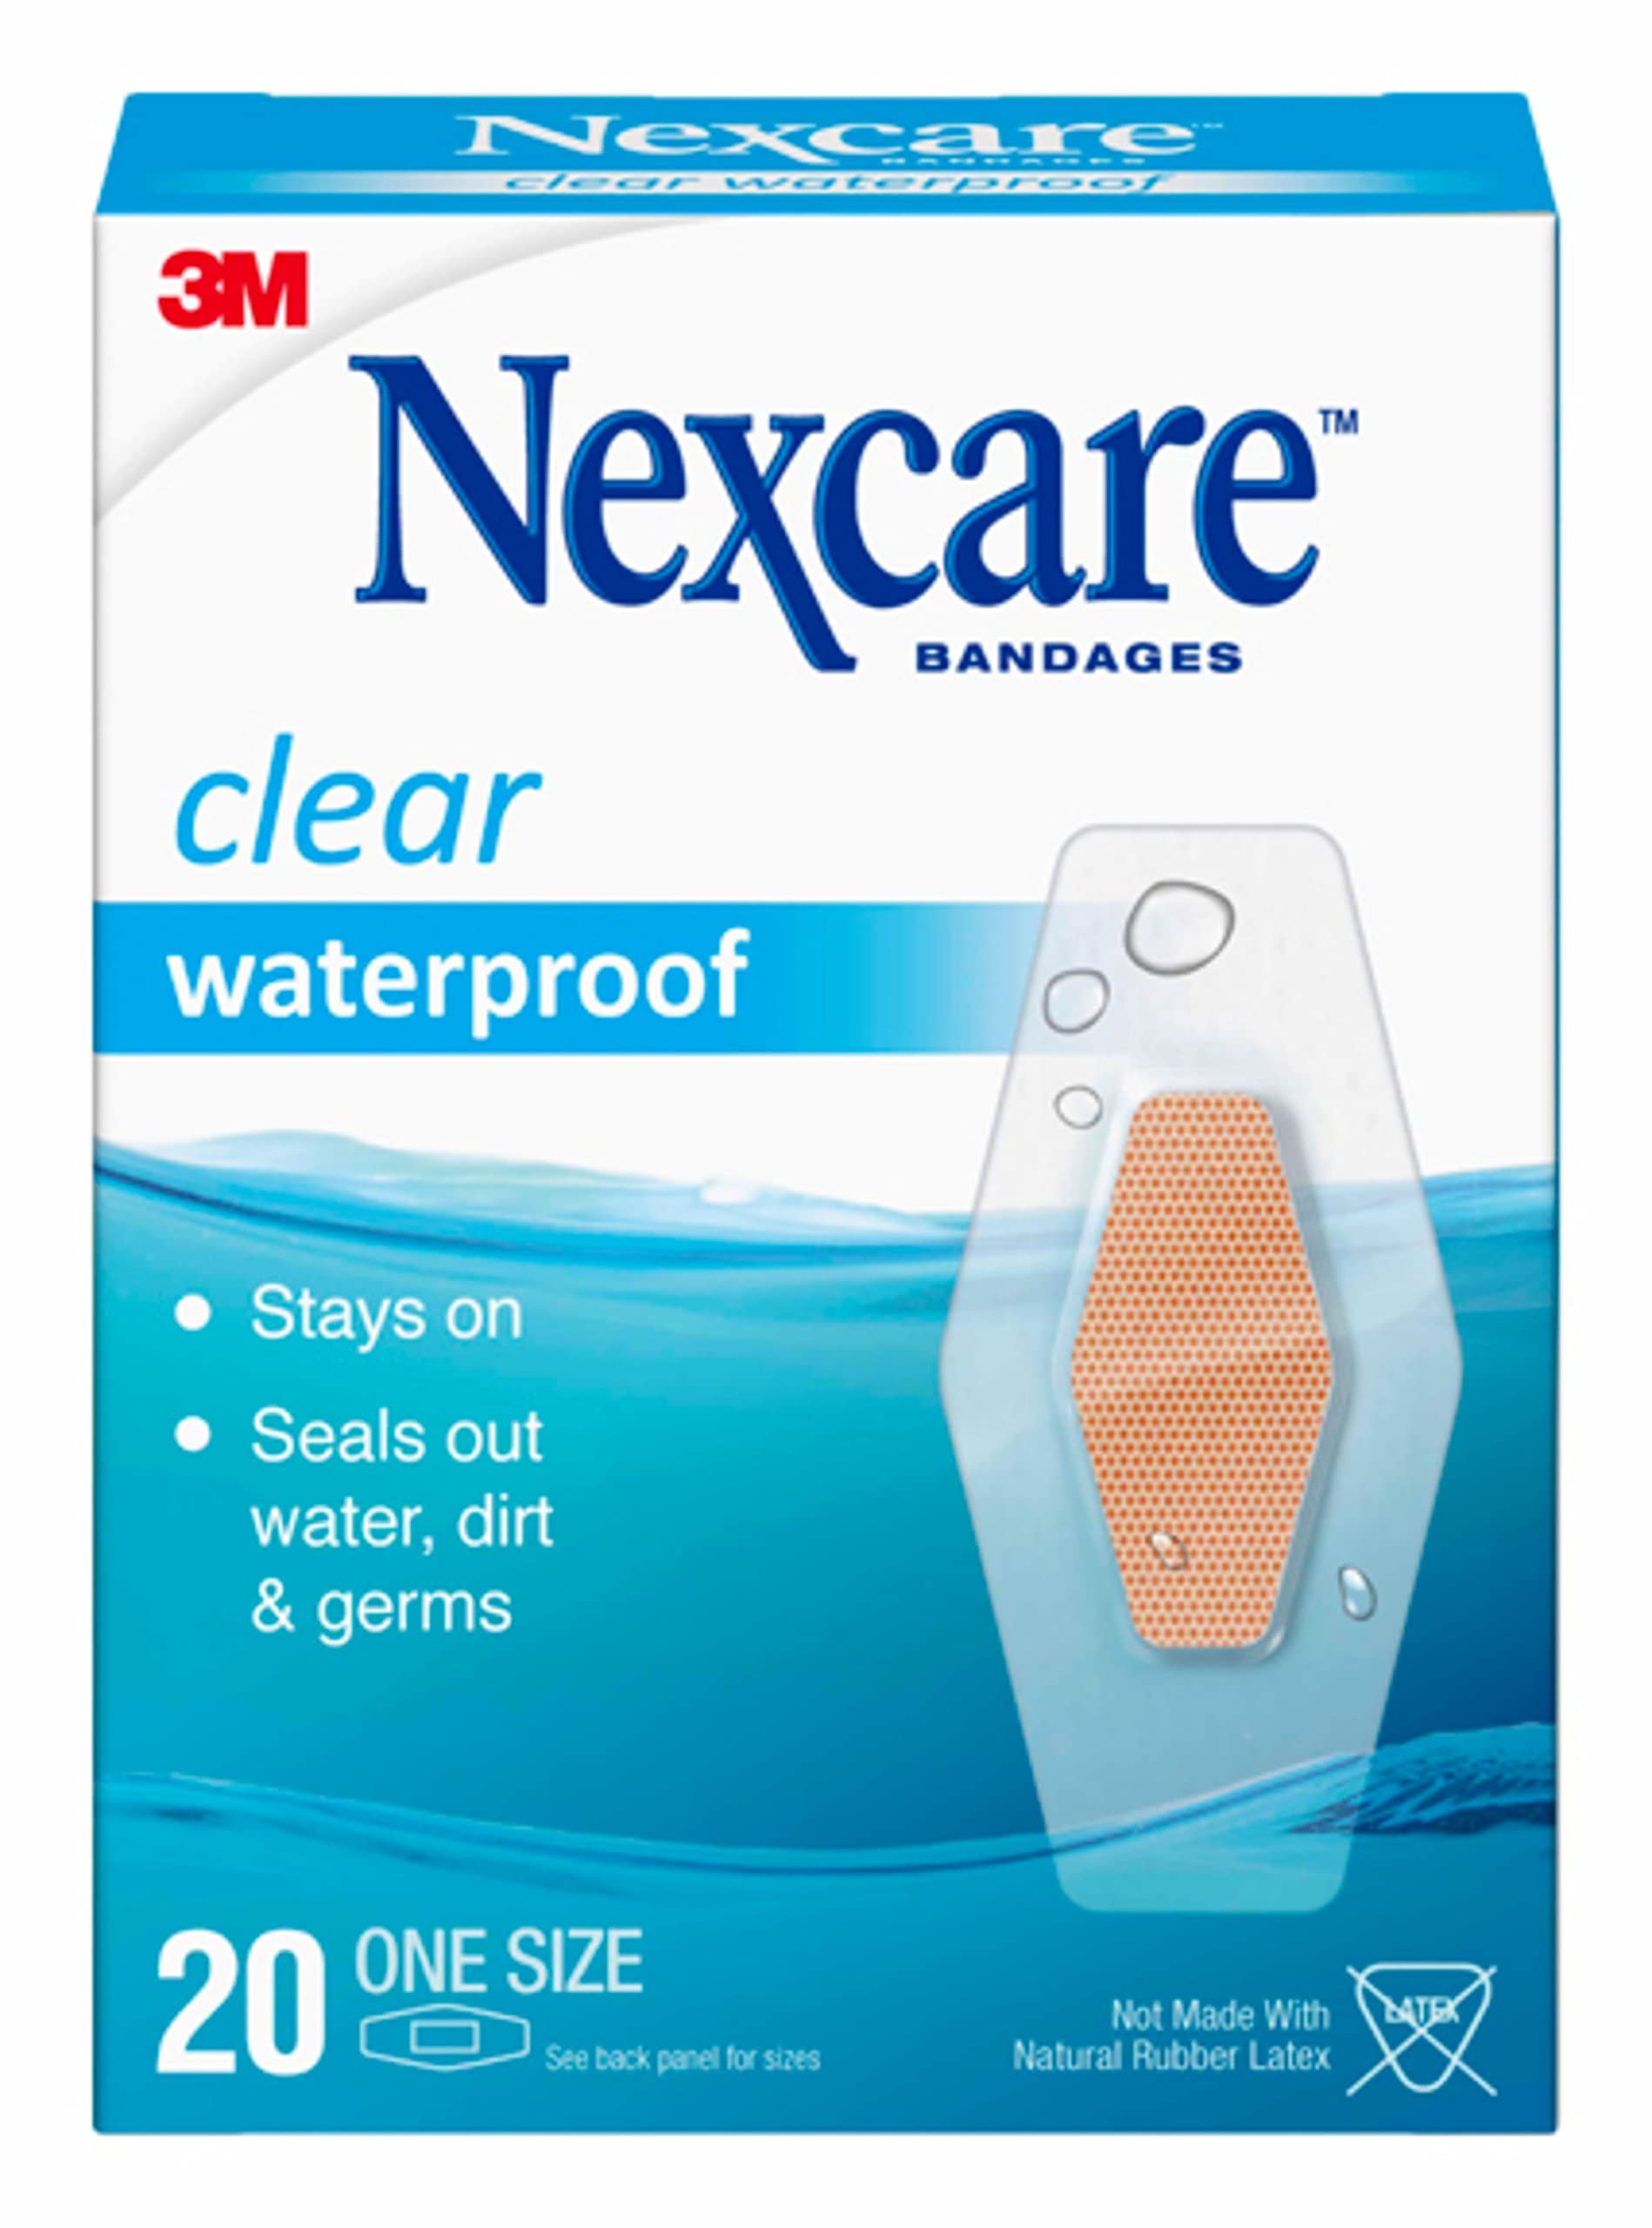 Nexcare Waterproof Clear Bandages, Germproof, 20 Count Packages (Pack of 4)